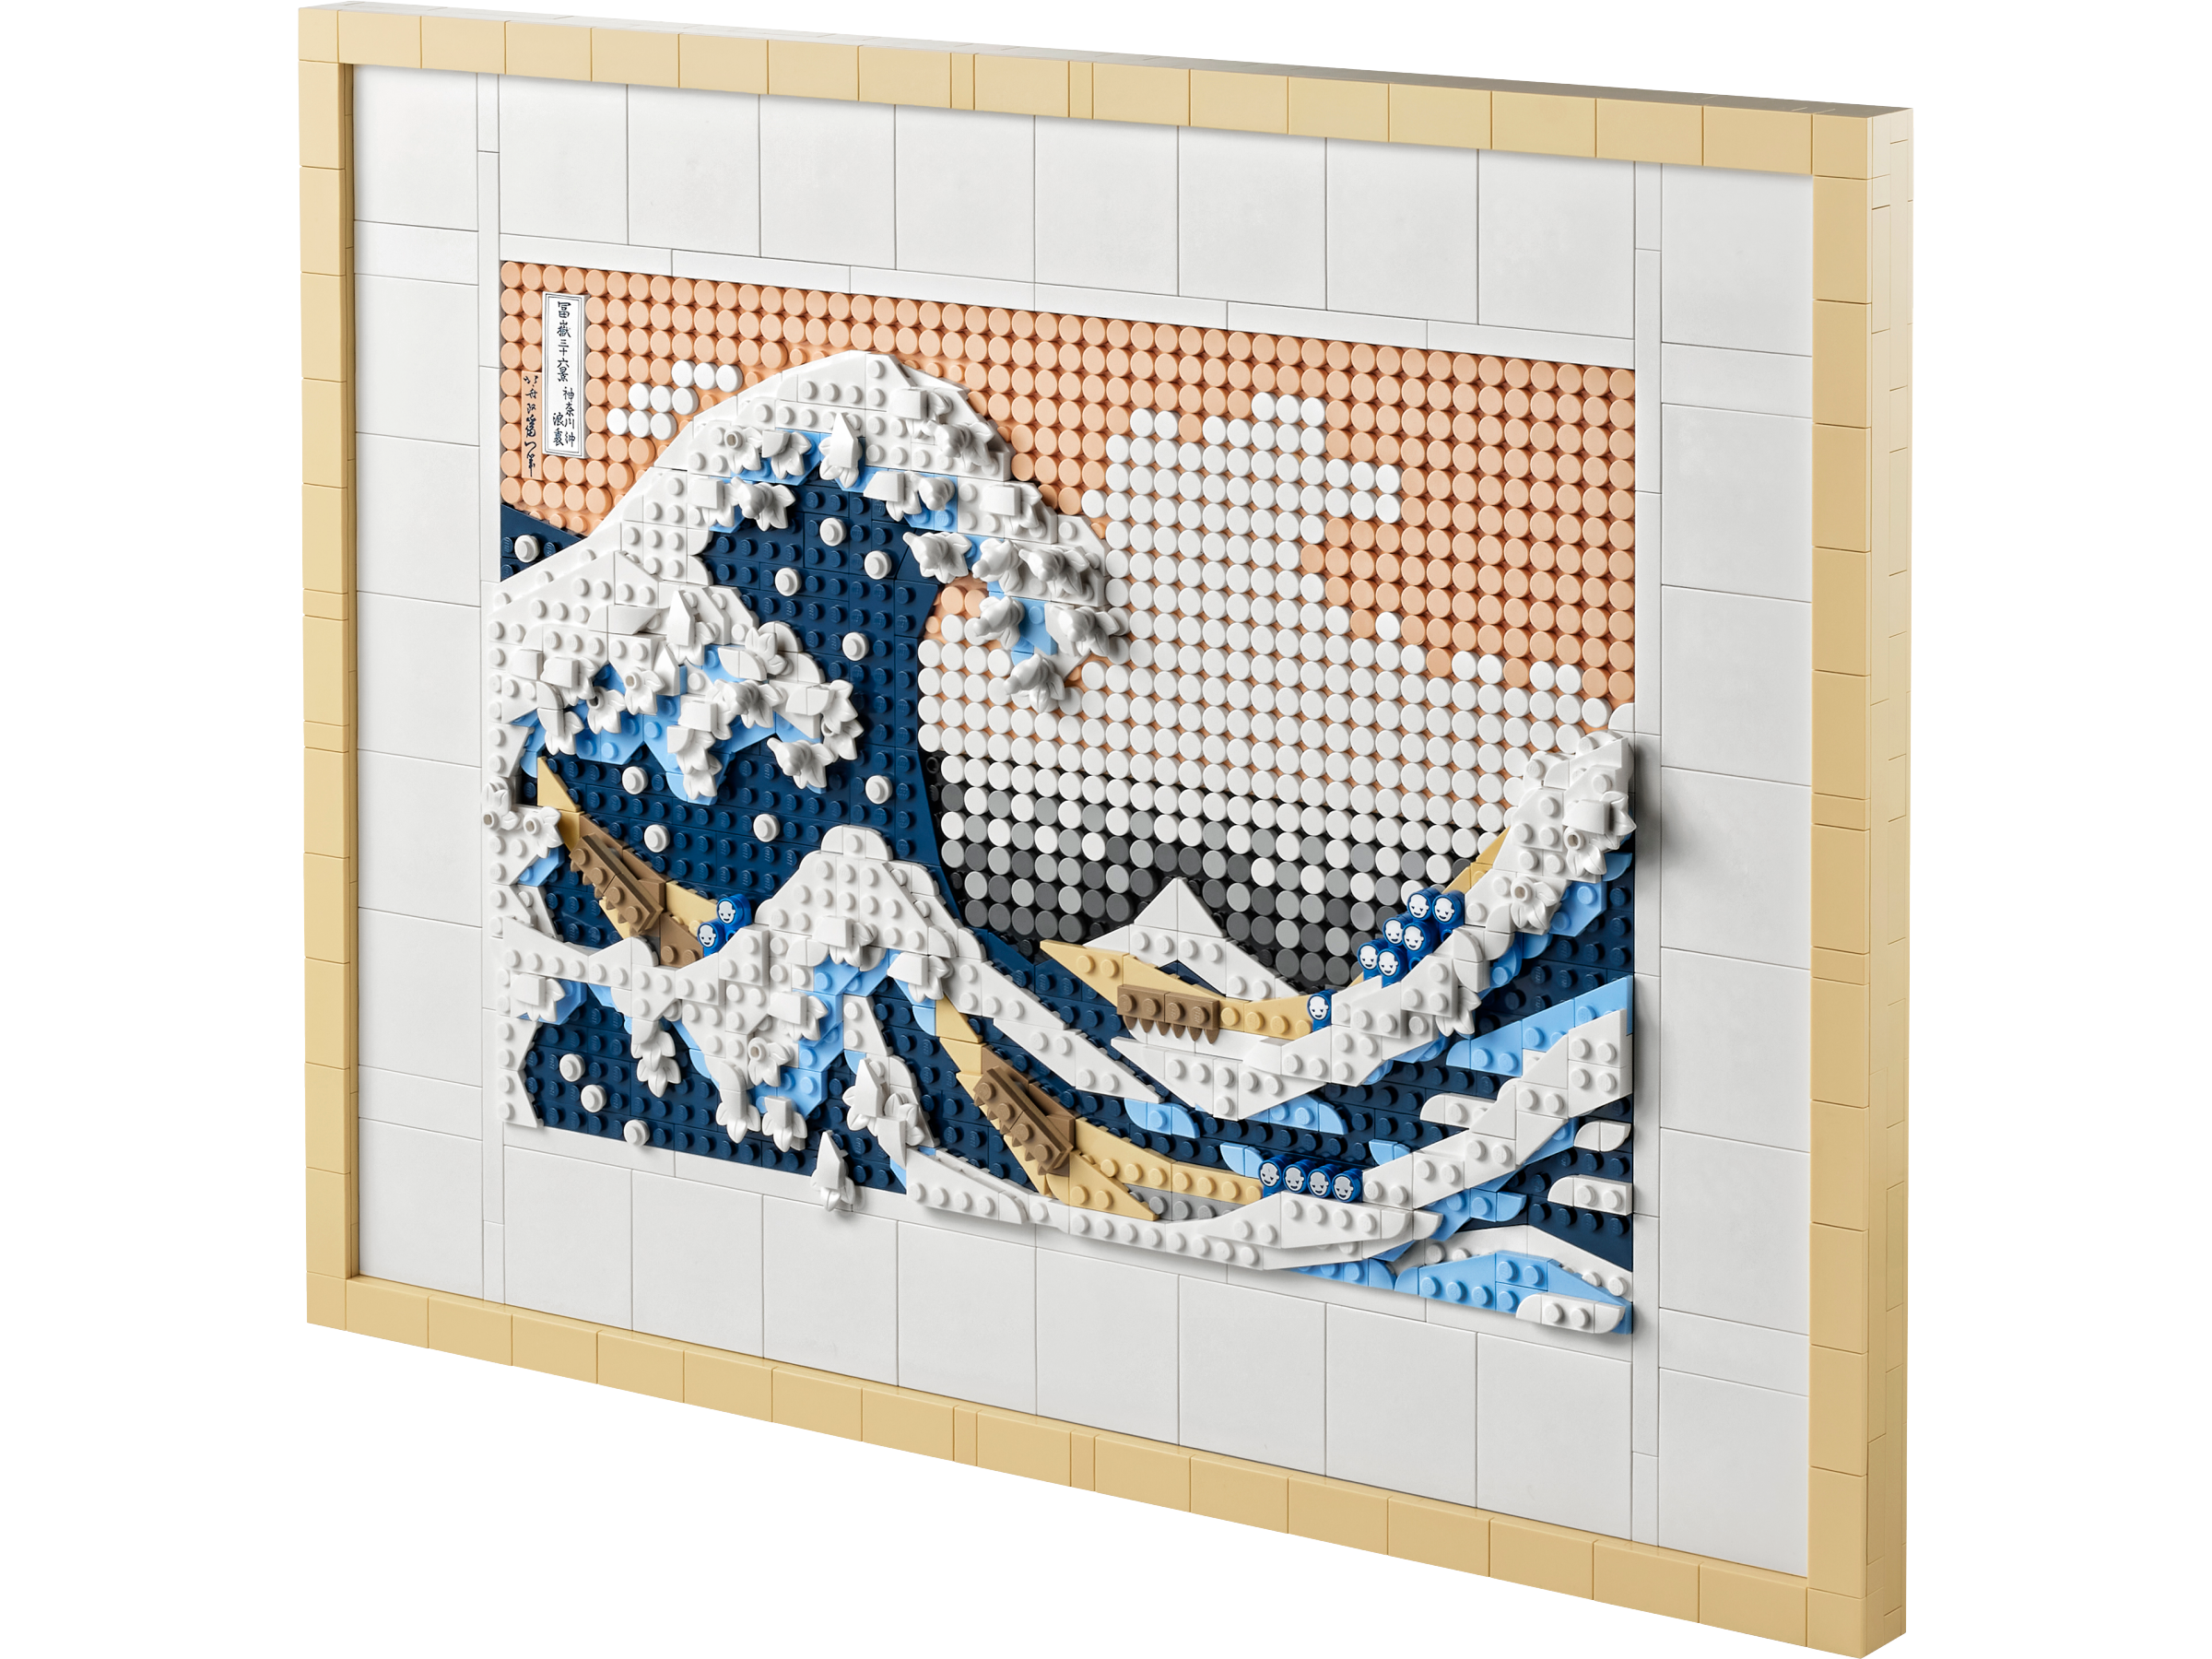 LEGO® Art Sets and Wall Art Toys